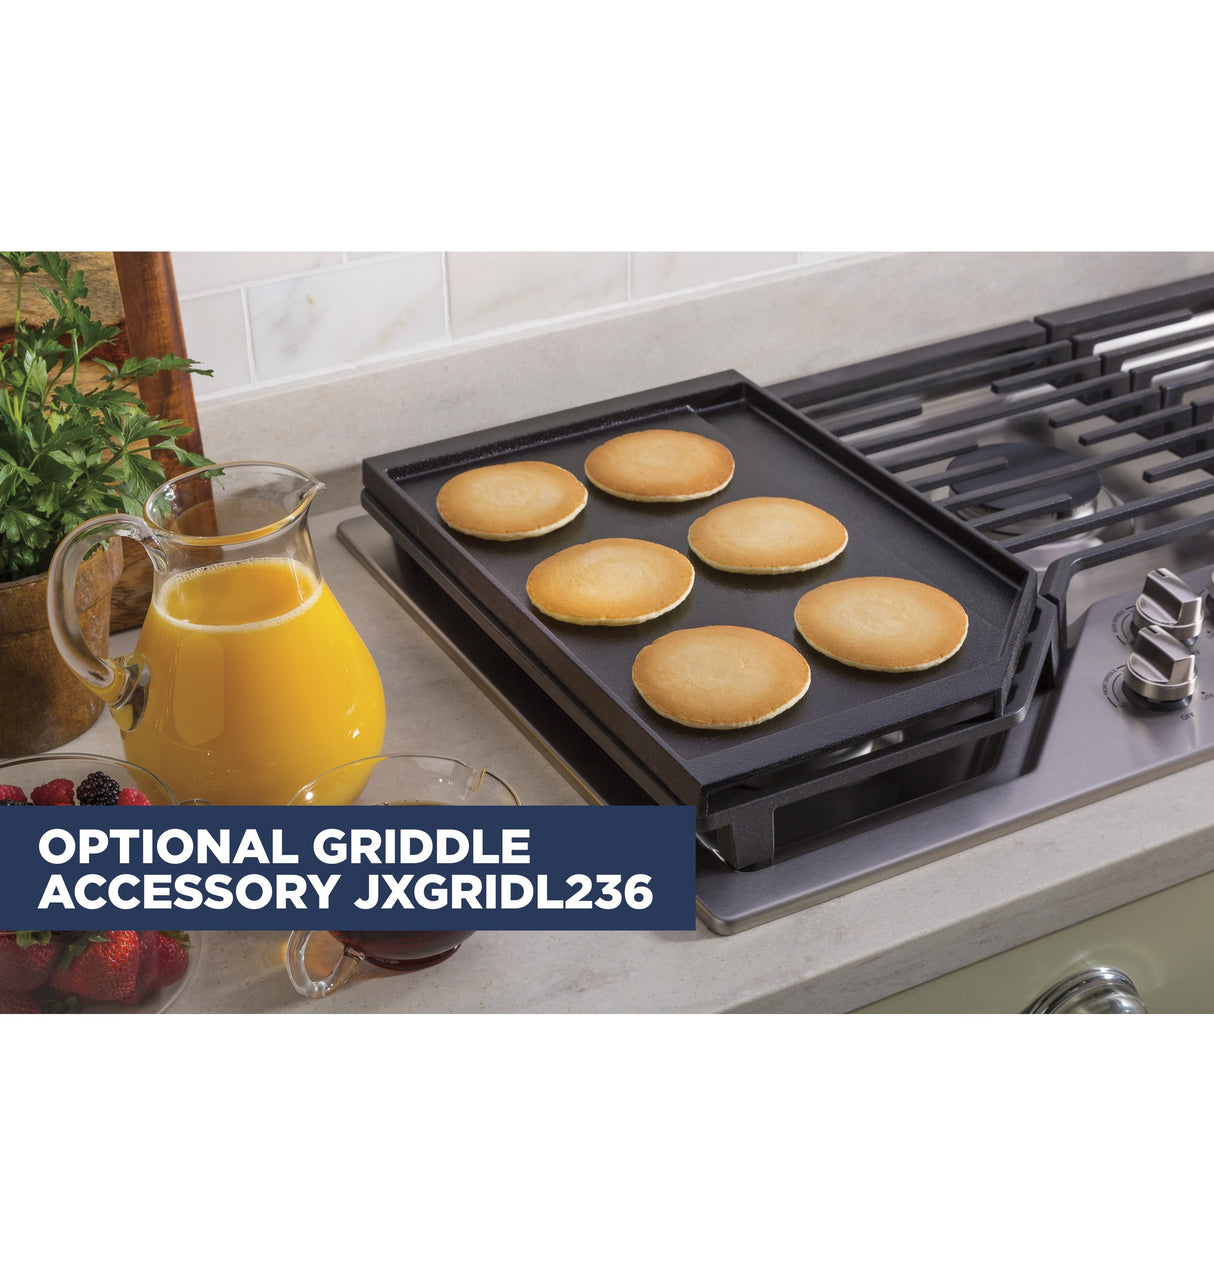 GE(R) 36" Built-In Gas Cooktop with 5 Burners and Dishwasher Safe Grates - (JGP5036SLSS)